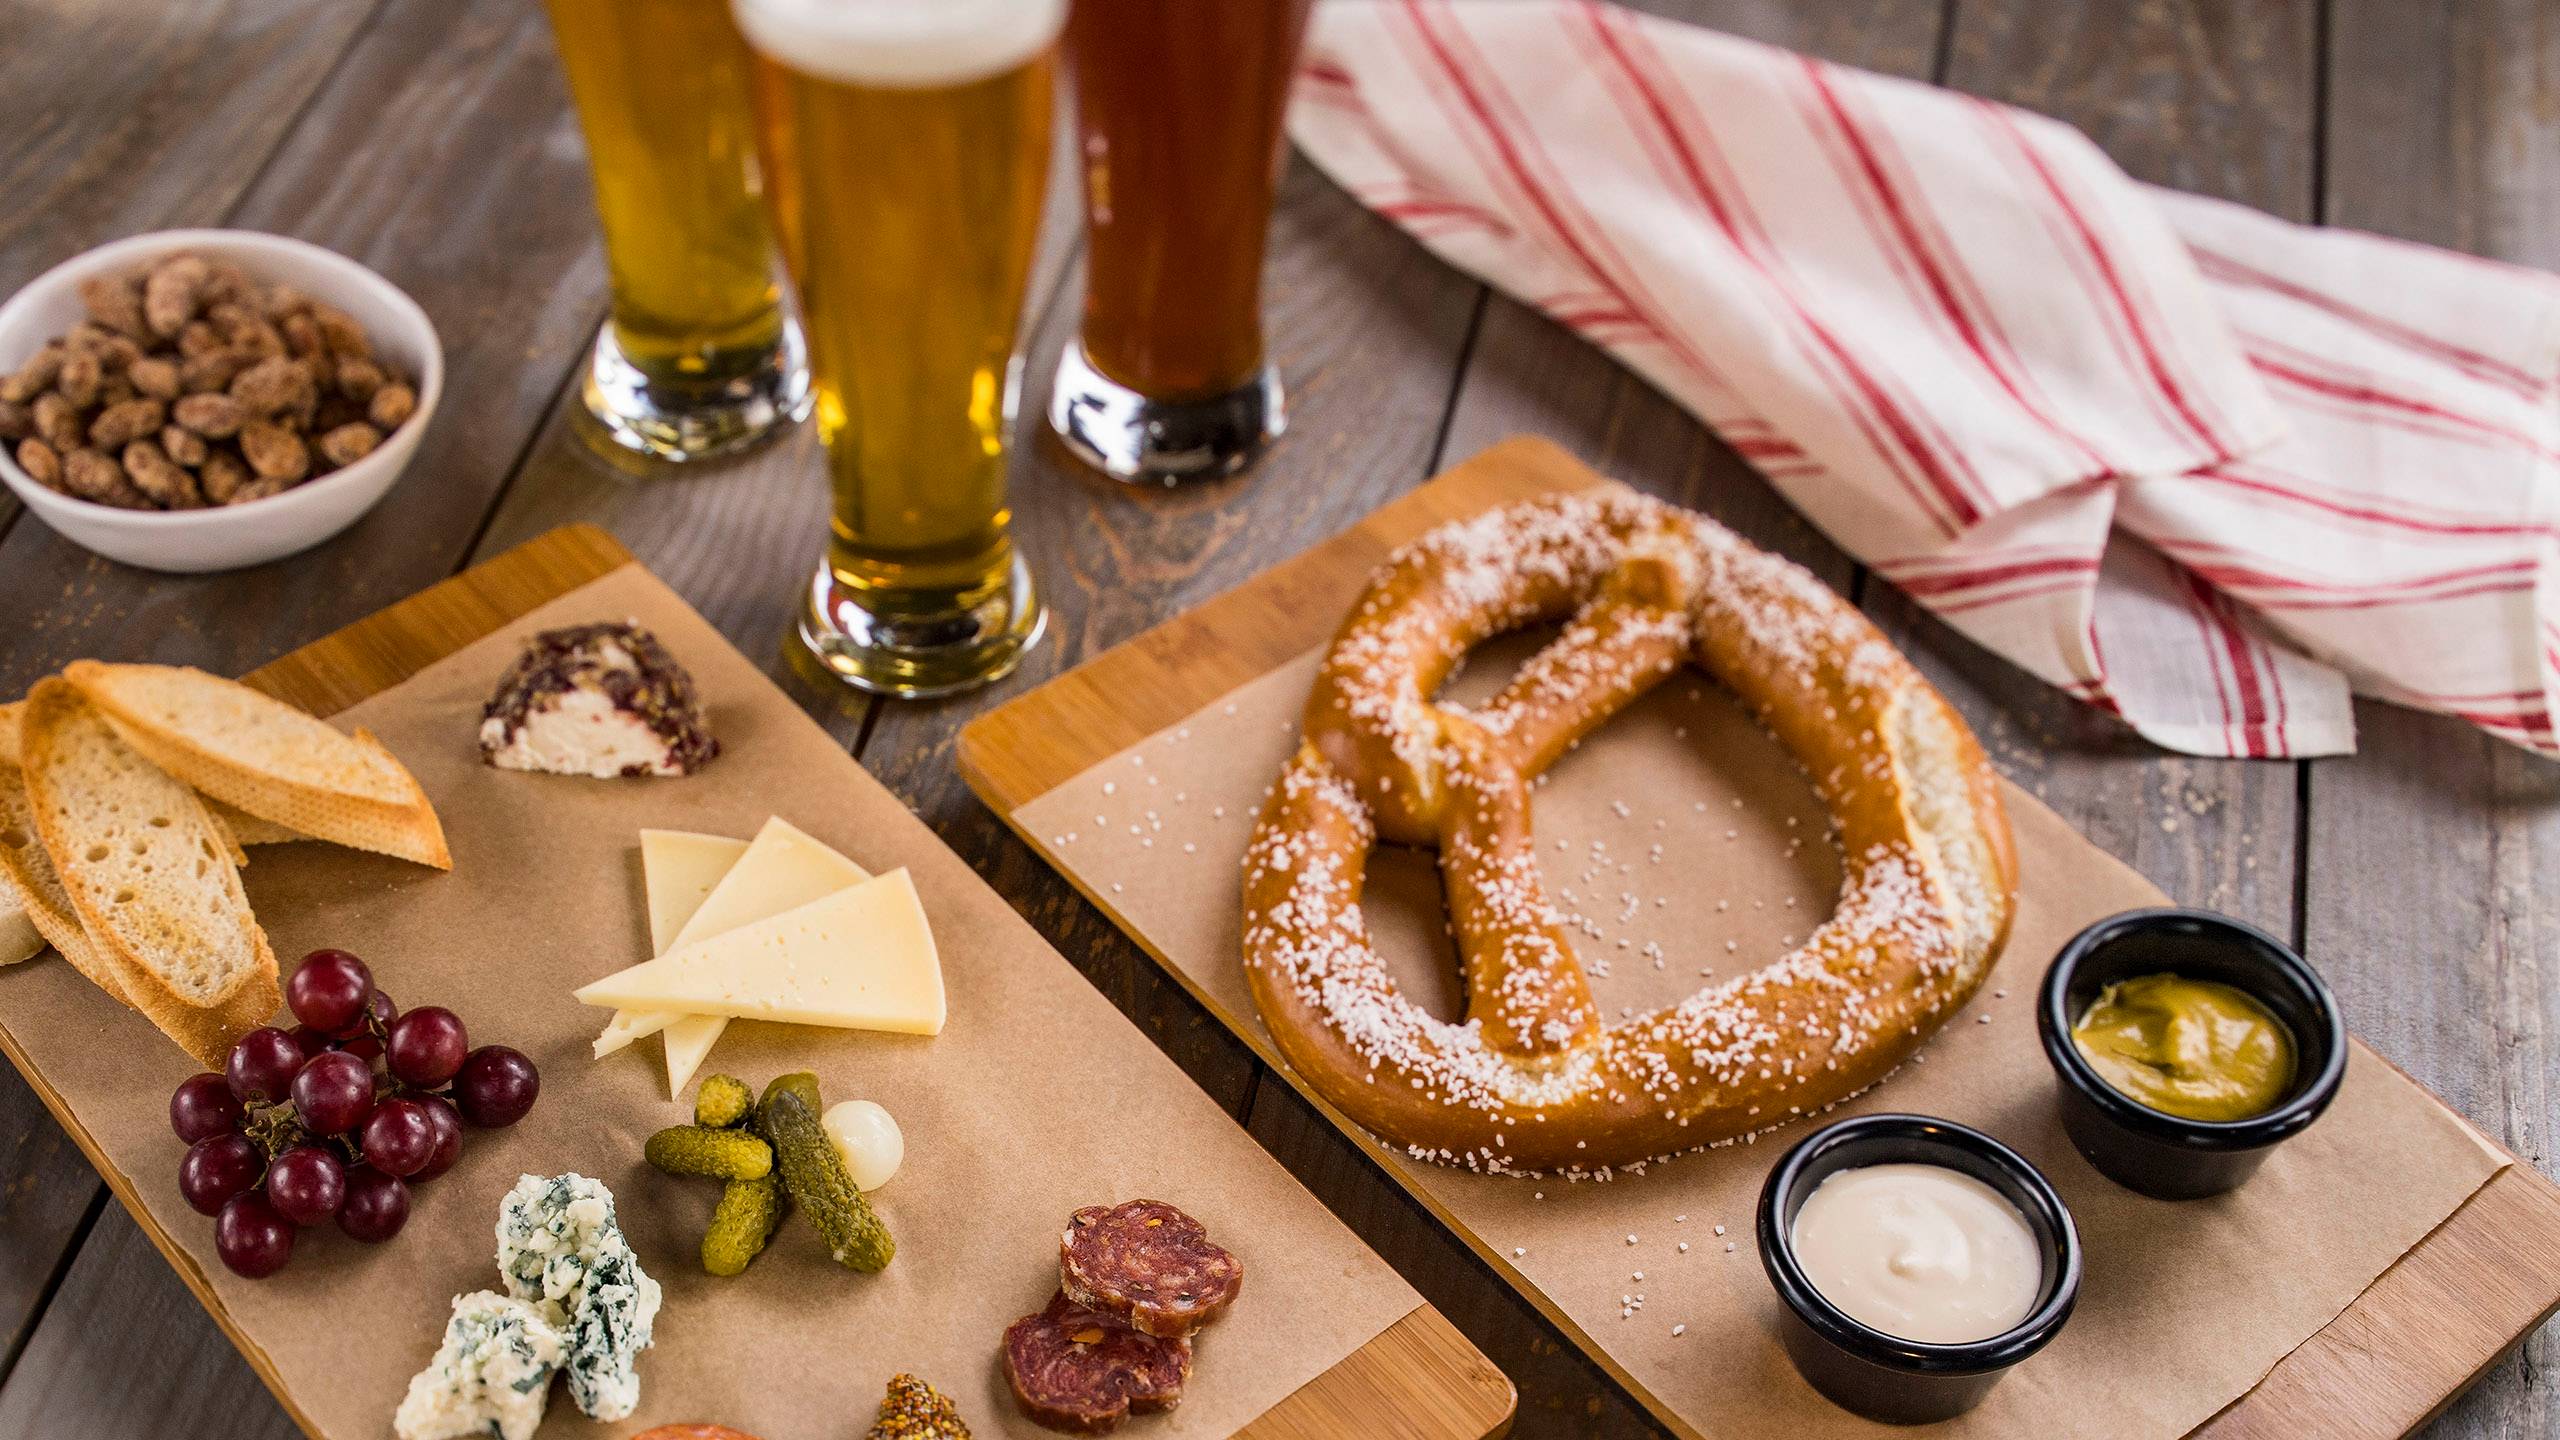 California Cheese and Charcuterie Plate and the Bavarian Pretzel with beer-cheese Fondue and Spicy Mustard